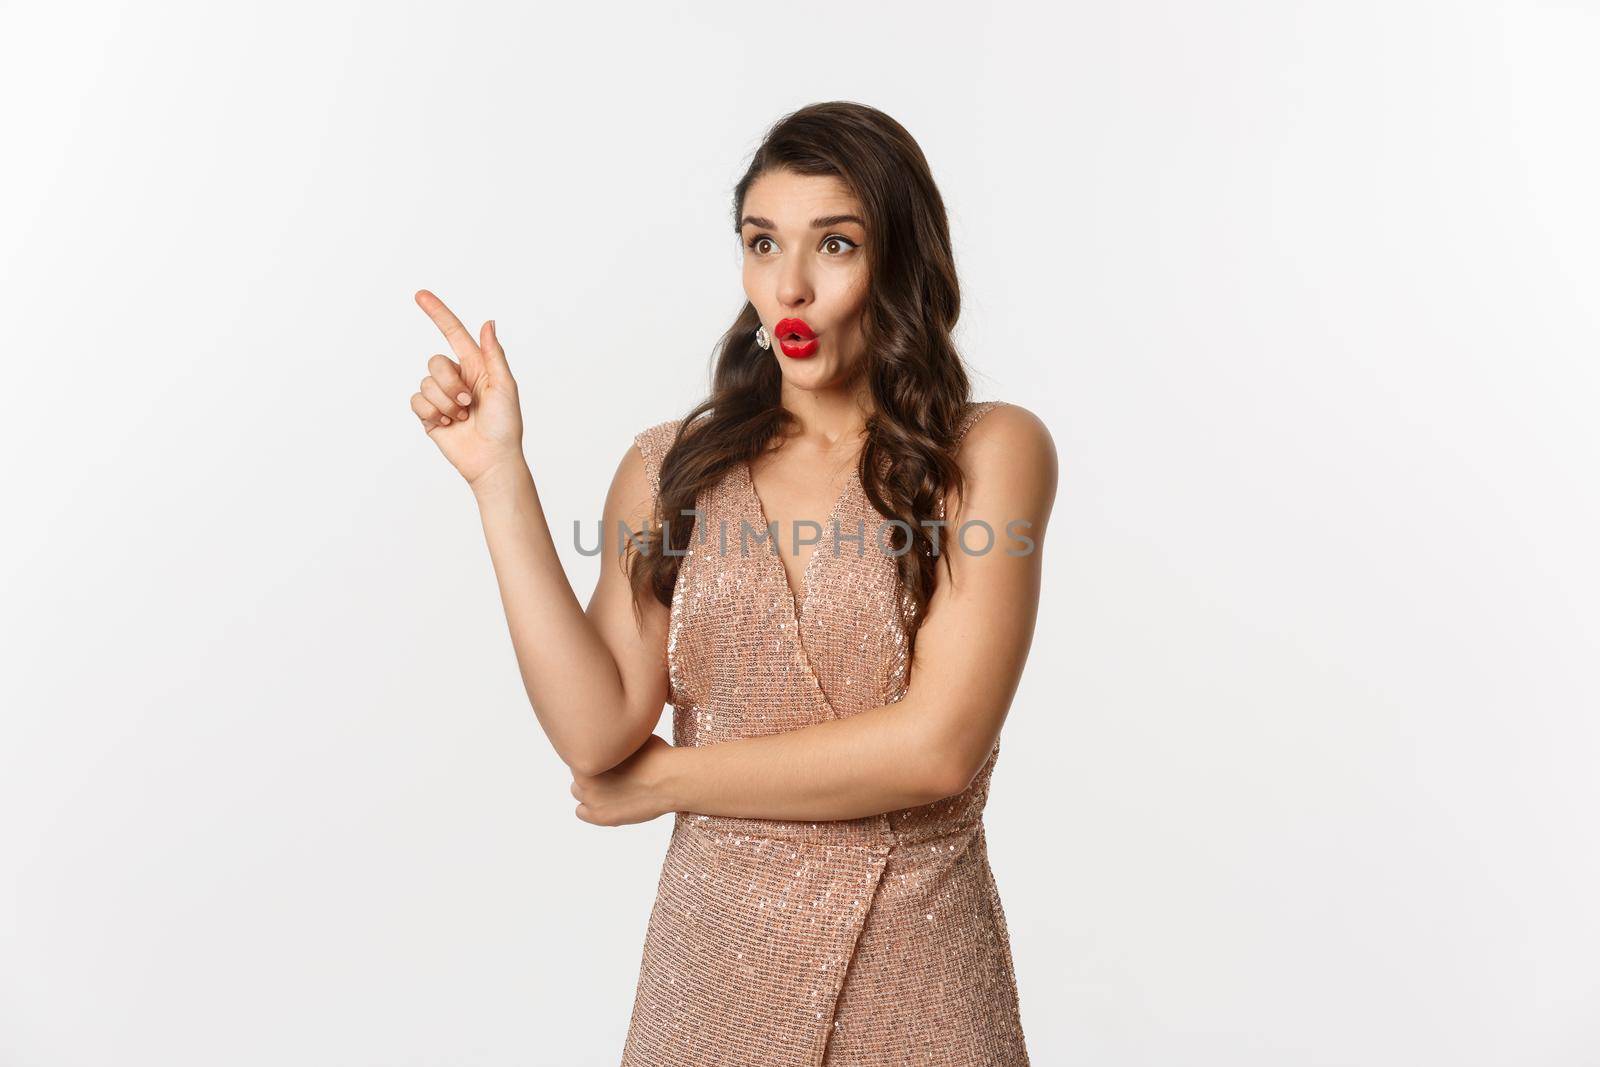 Christmas, holidays and celebration concept. Surprised girlfriend in evening dress, saying wow and pointing finger at promo offer, starring at logo, standing over white background.